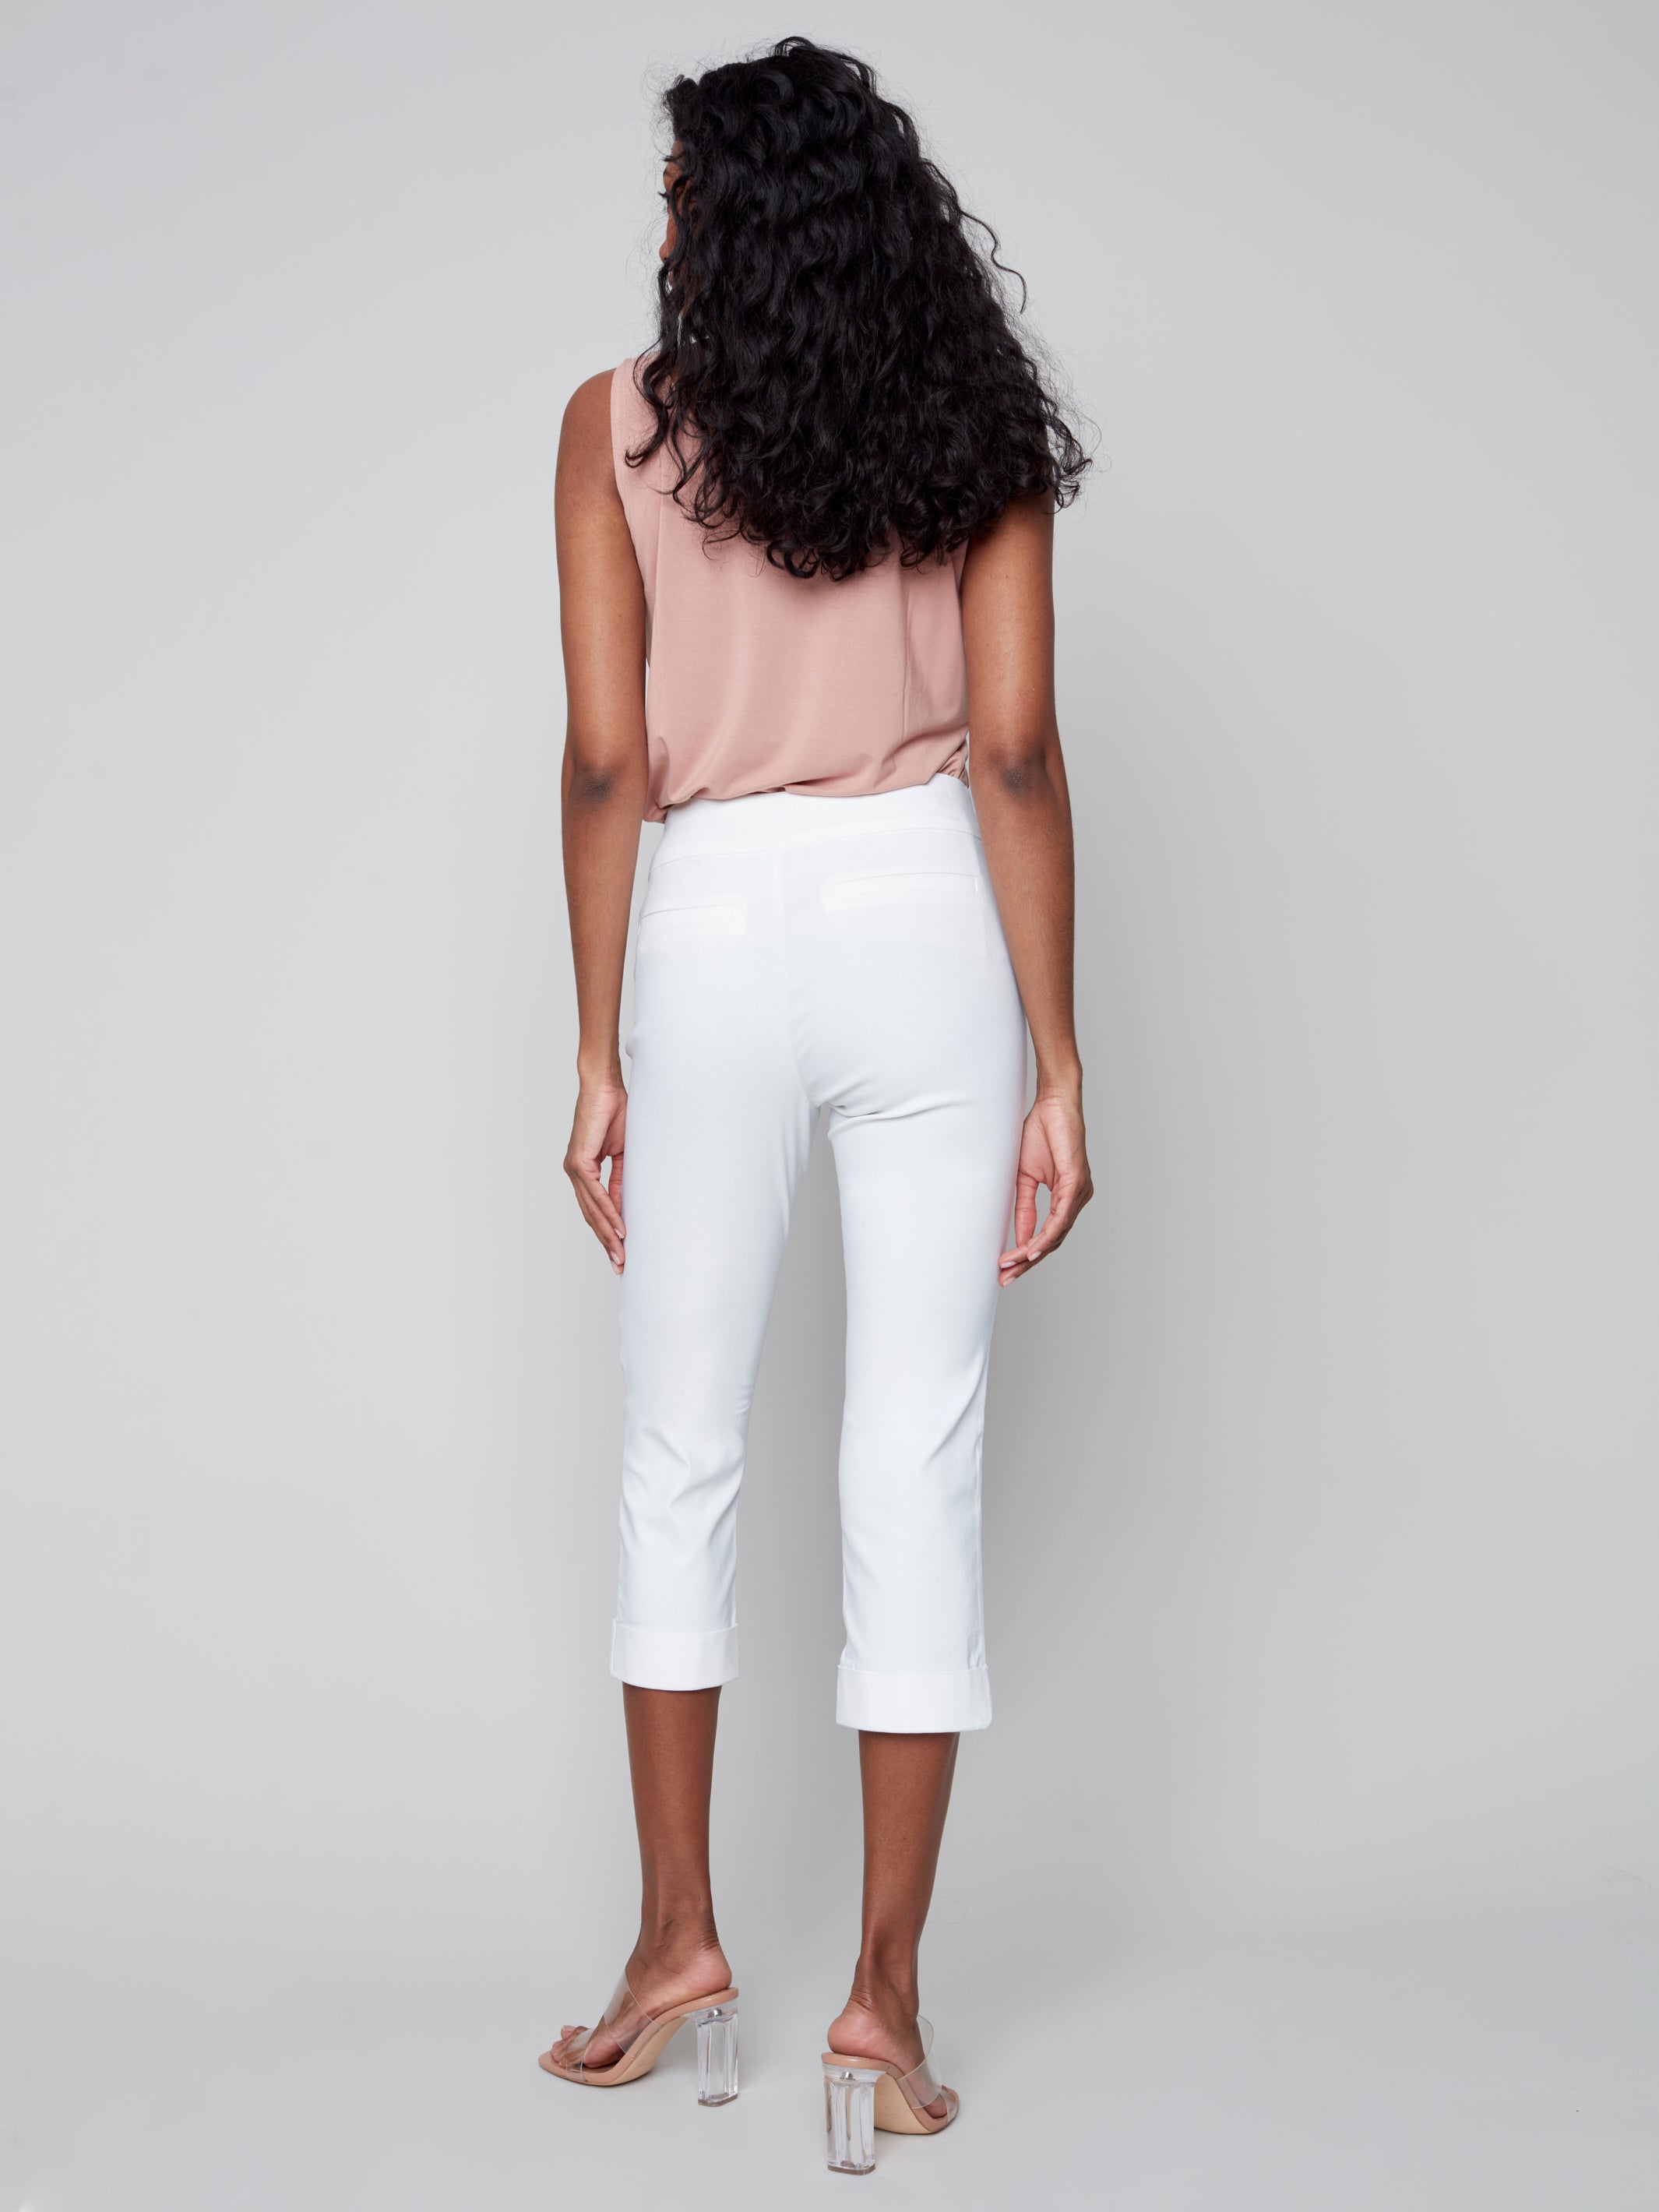 Pull On Stretch Cropped Cuffed Pant by Charlie B – MeadowCreek Clothiers